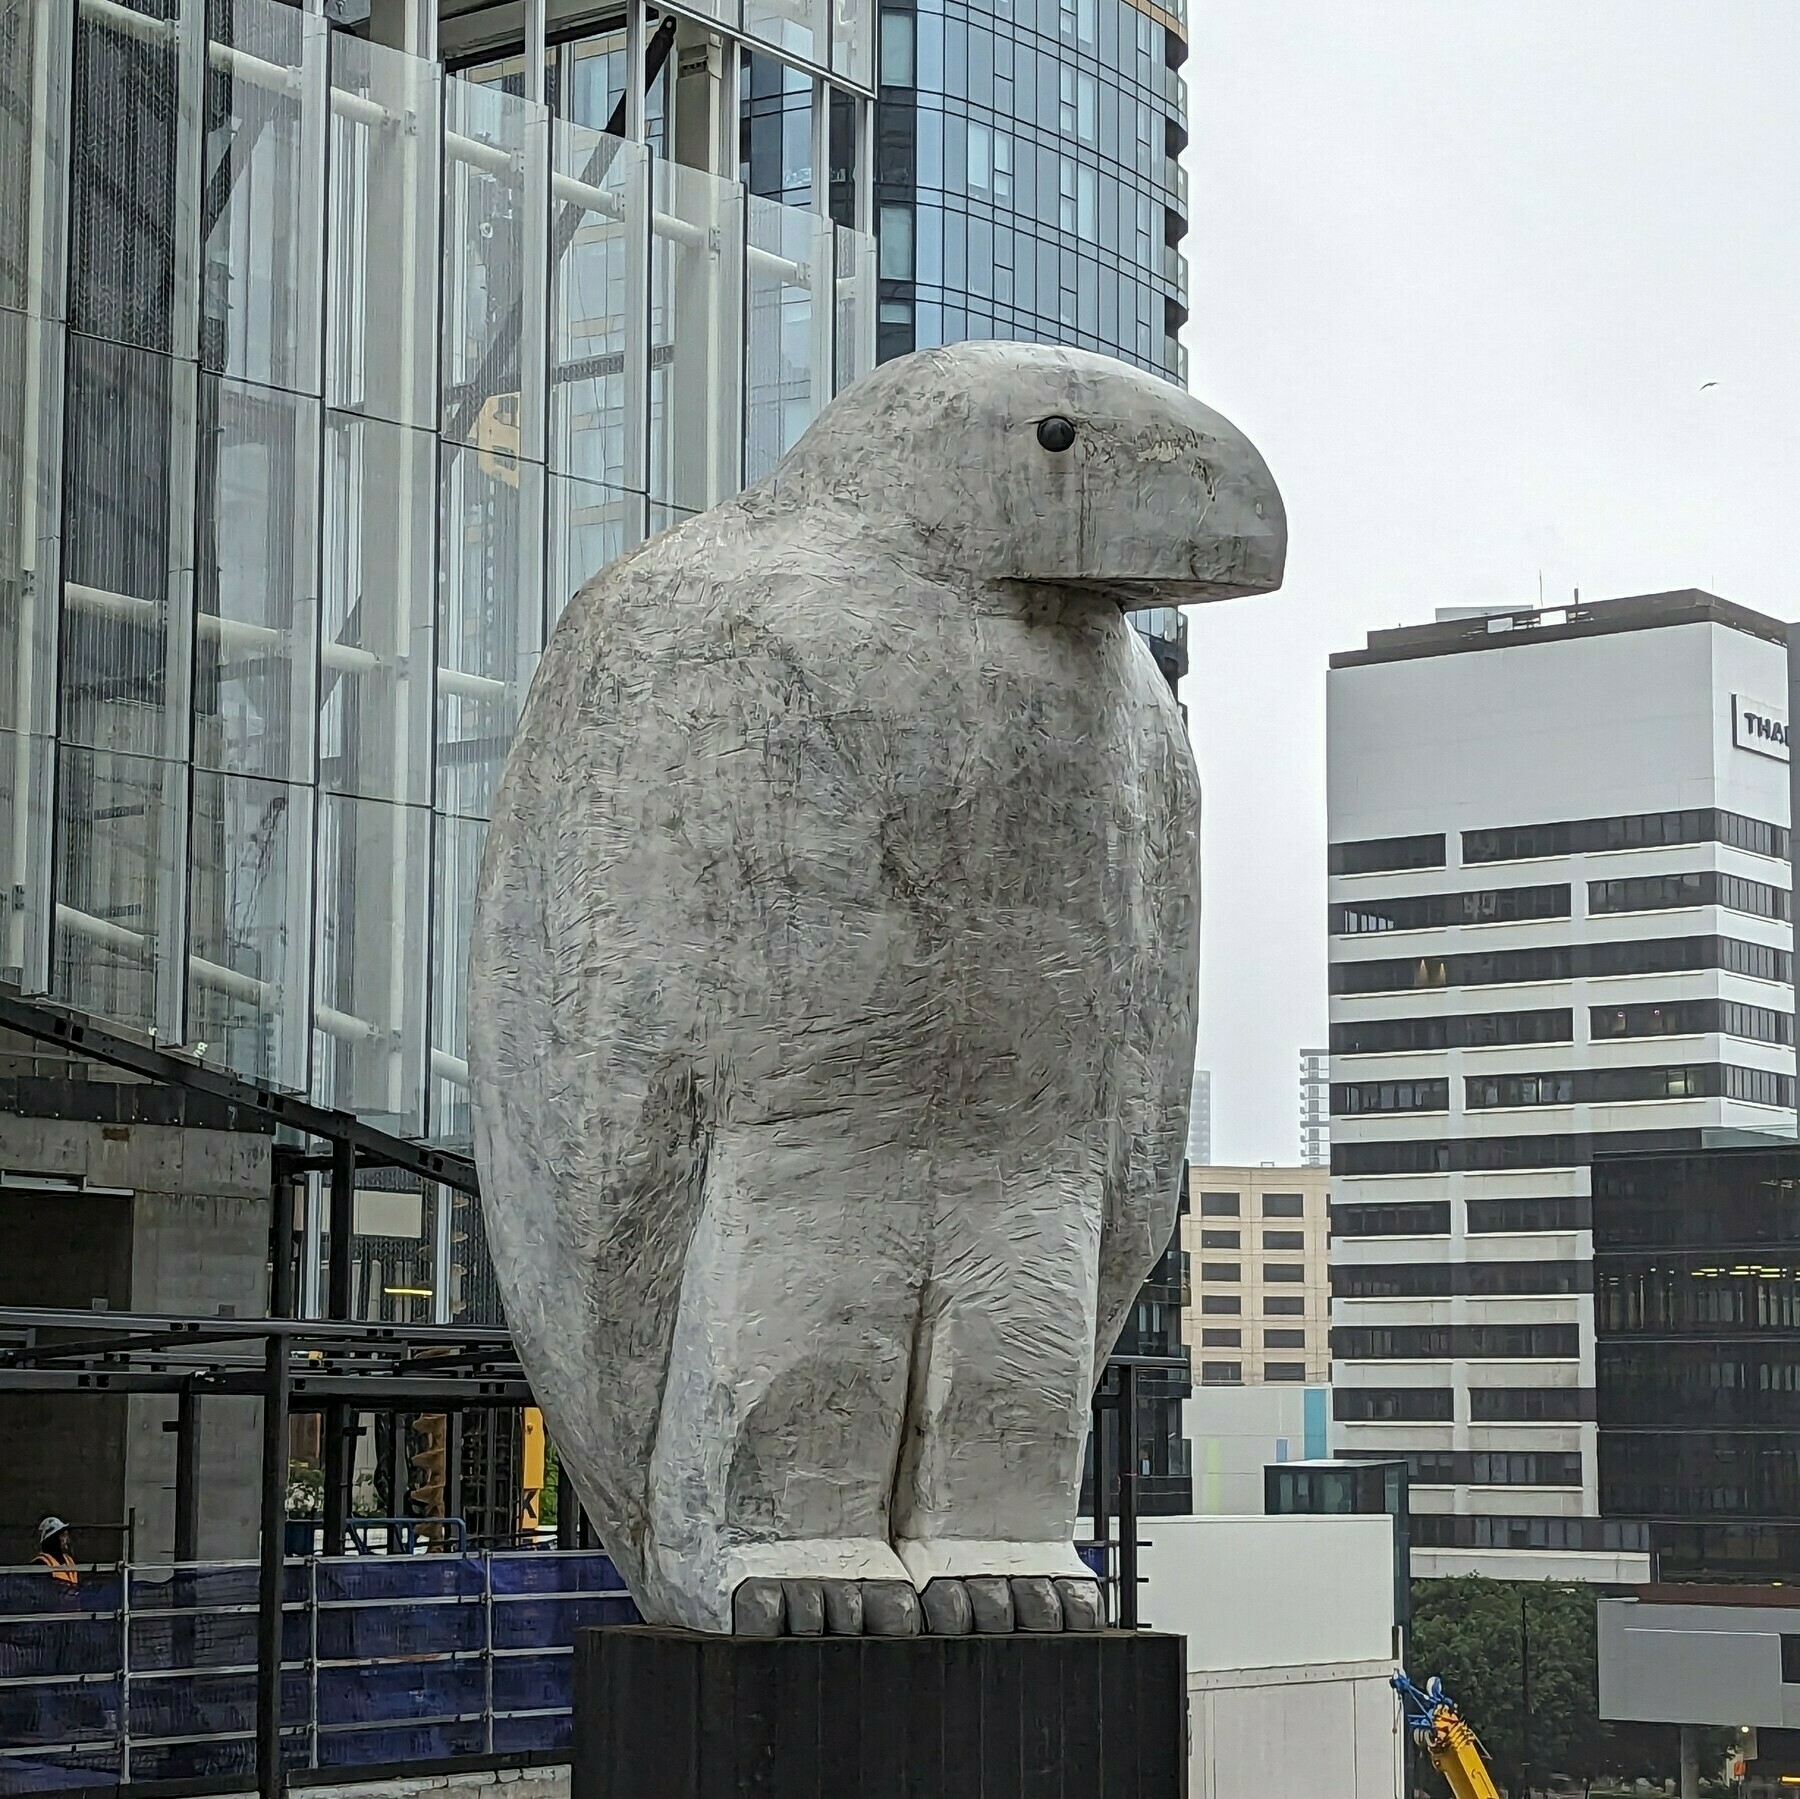 A white, abstract sculpture of an eagle surrounded by buildings